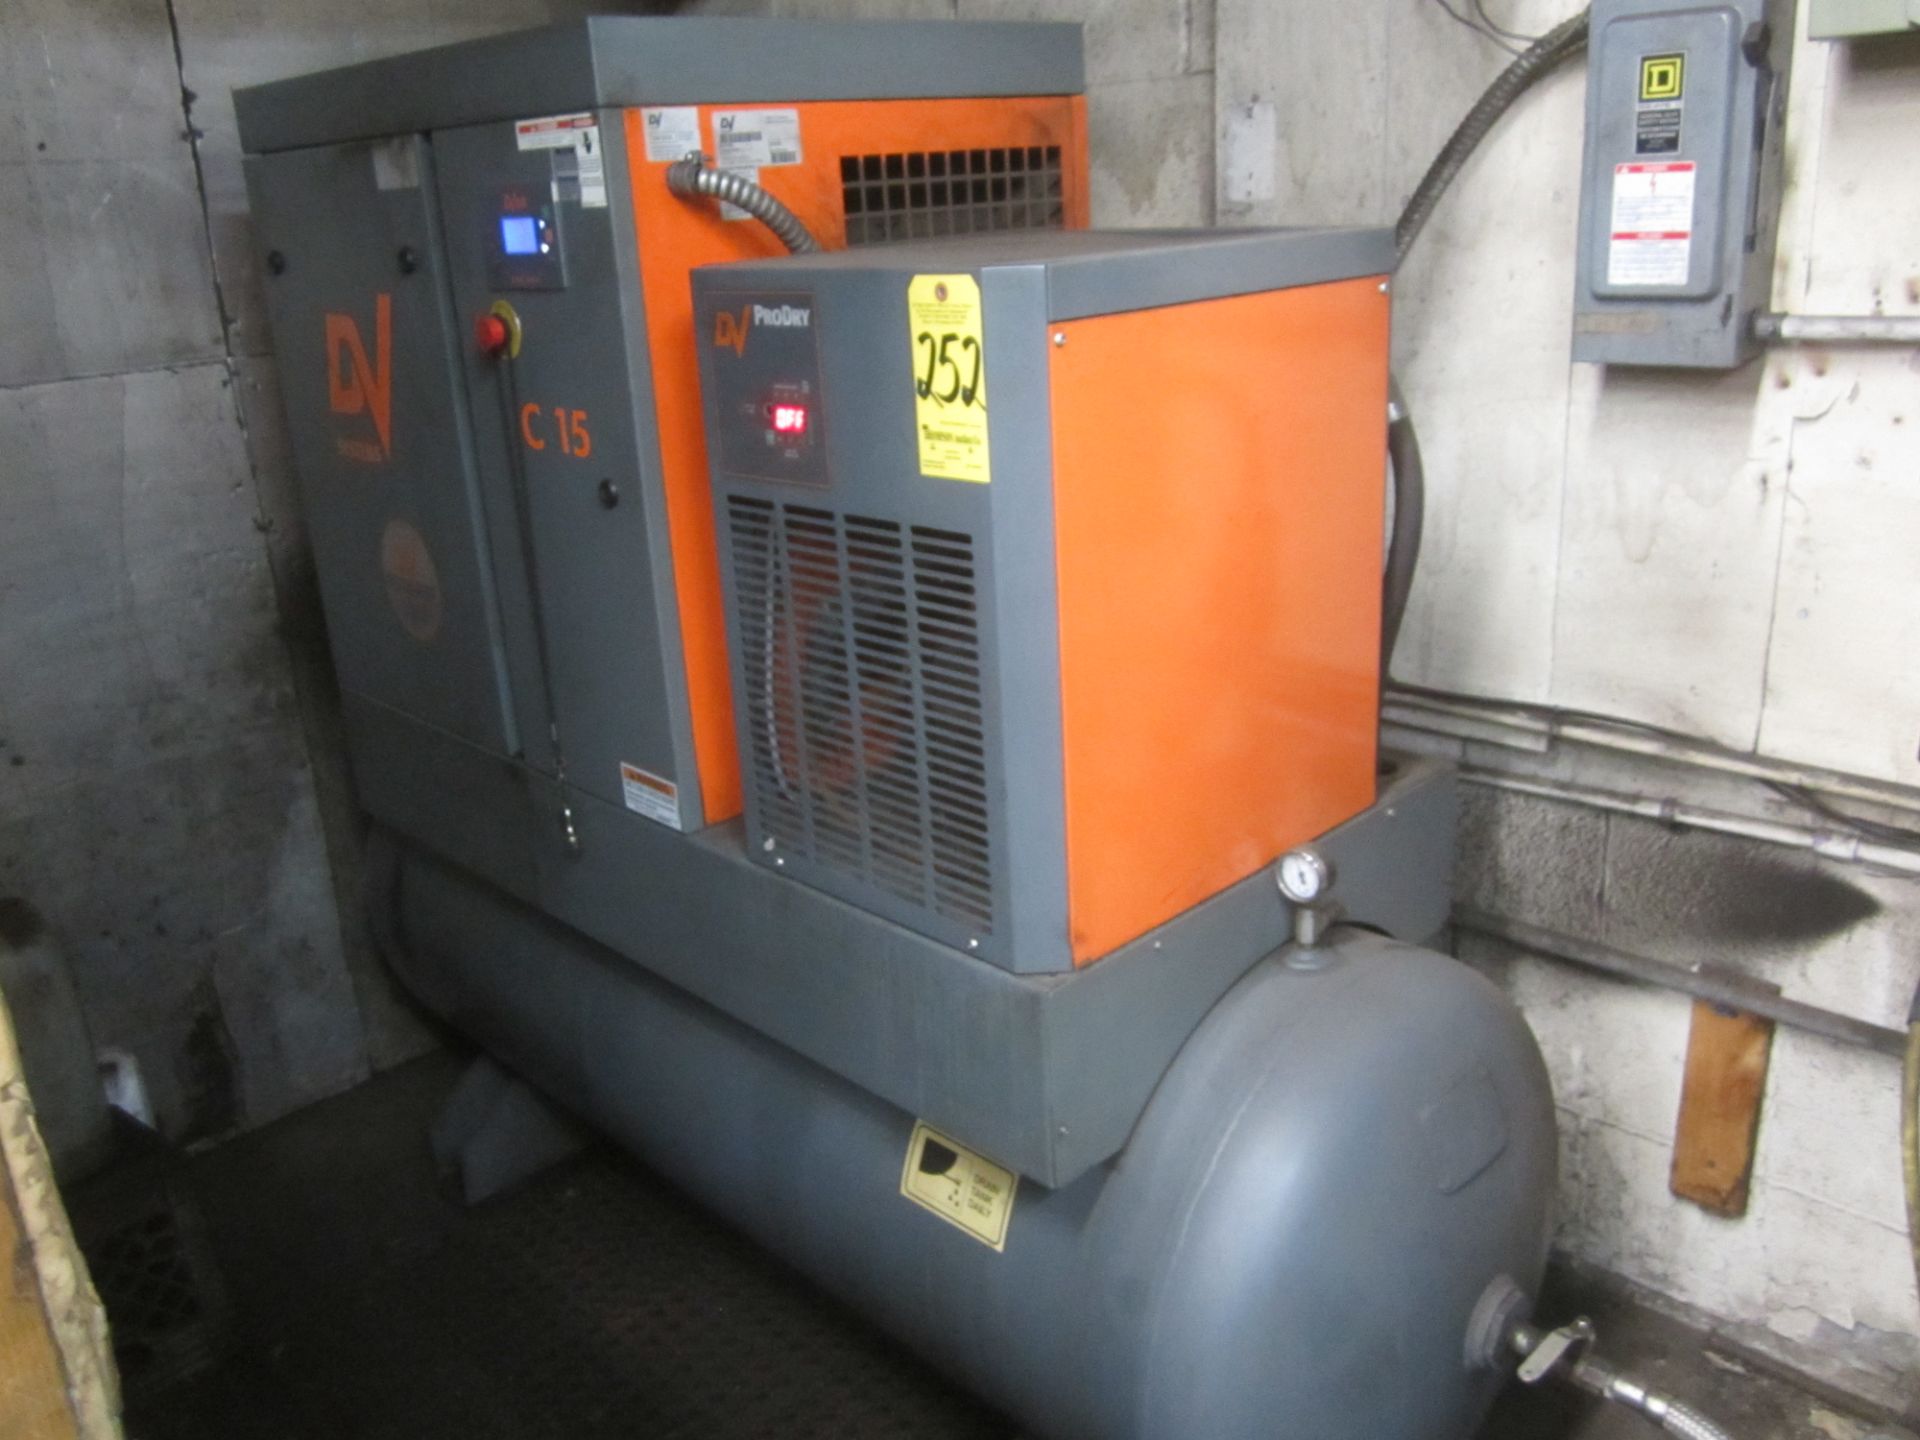 DV Systems Model C15TD Rotary Screw Air Compressor, s/n 37235, 15 HP, Built In Refrigerated Air